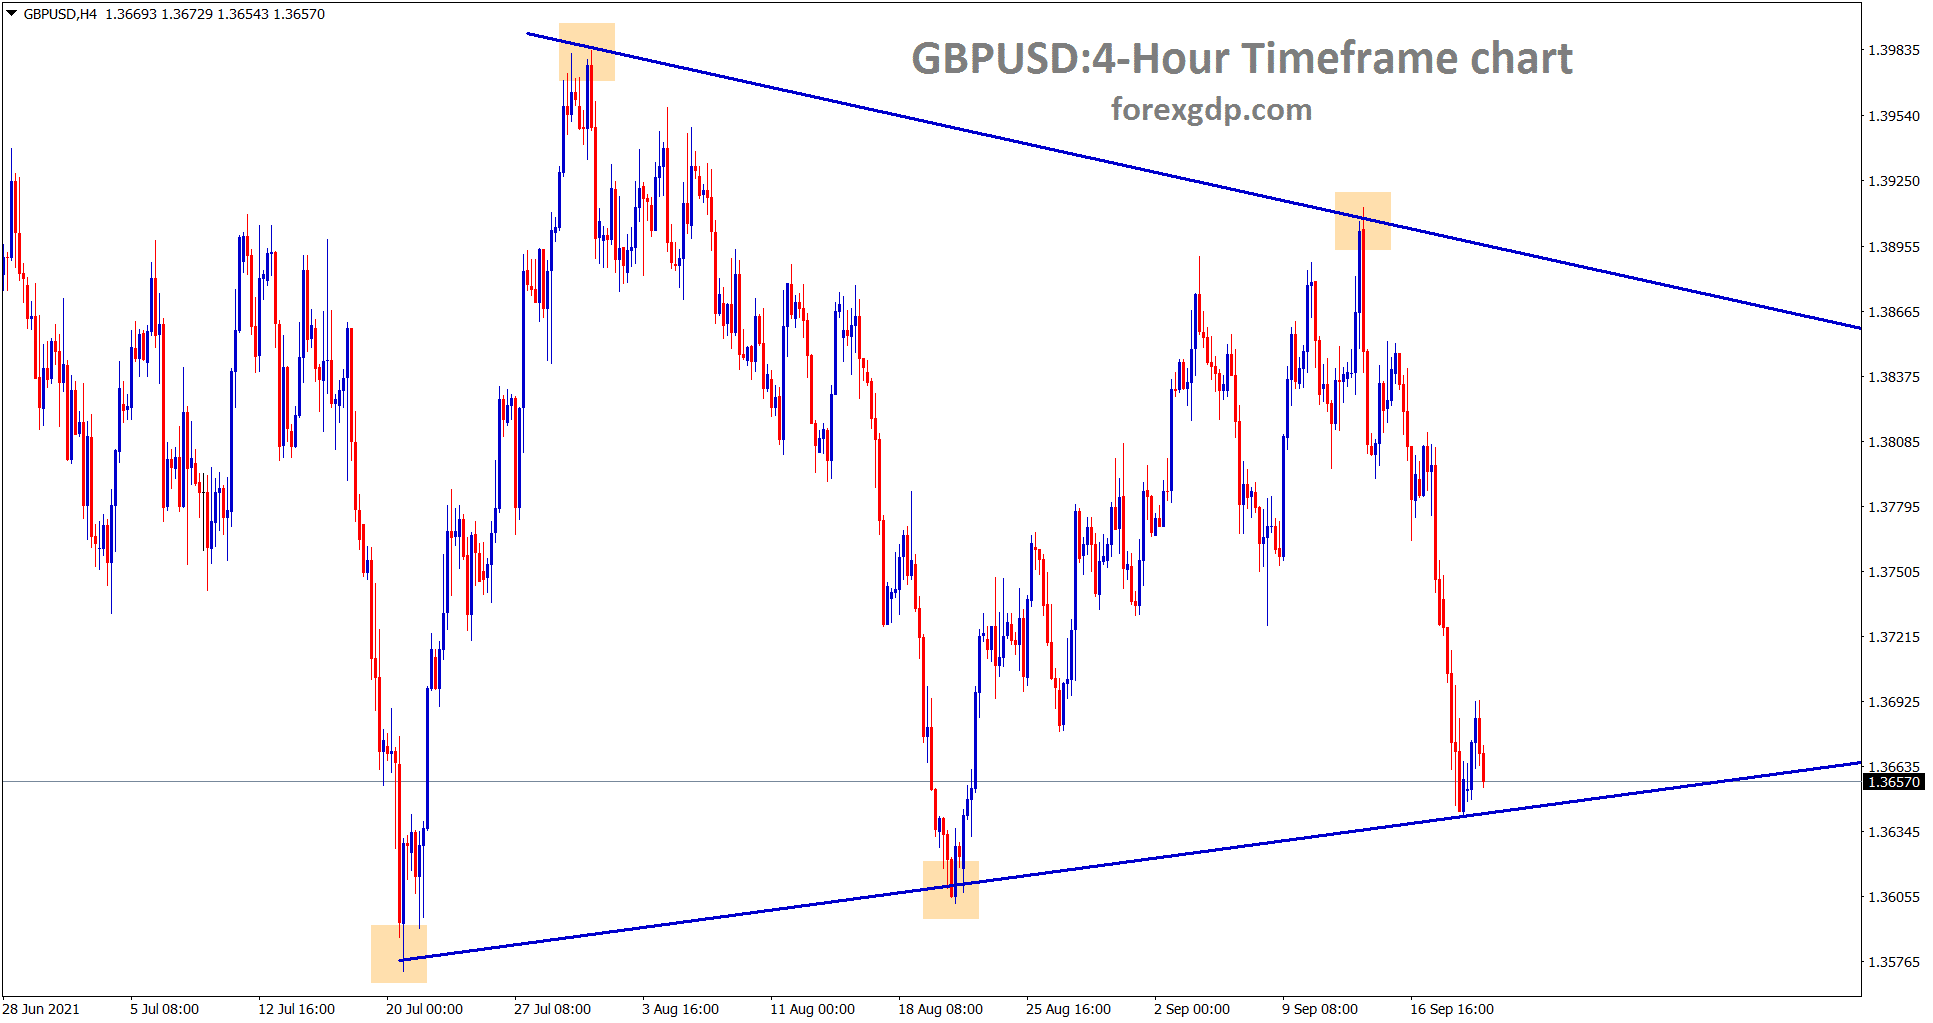 GBPUSD has formed a symmetrical triangle pattern wait for breakout from this pattern